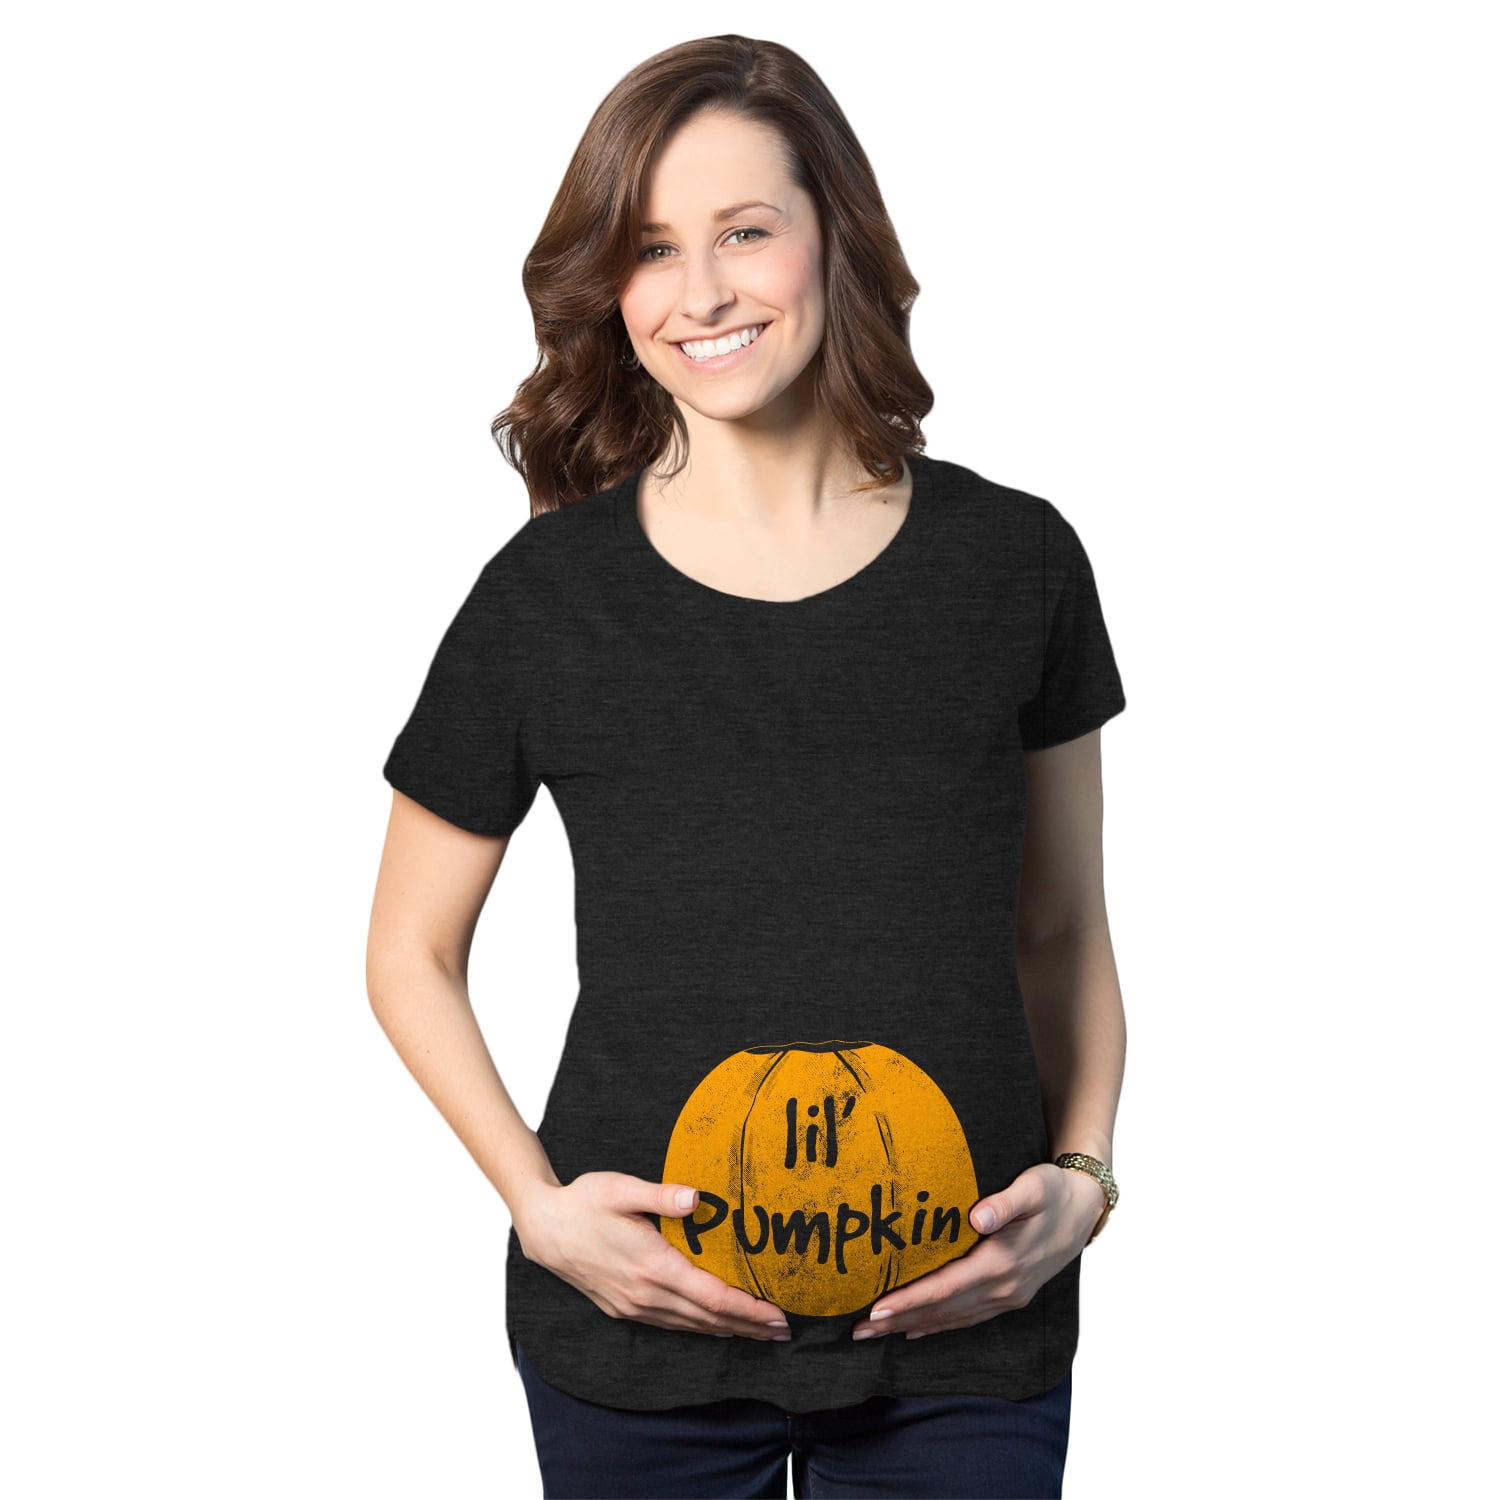 Thanks Giving Gold Pumpkin Mommy and Me Heather Shirts Set